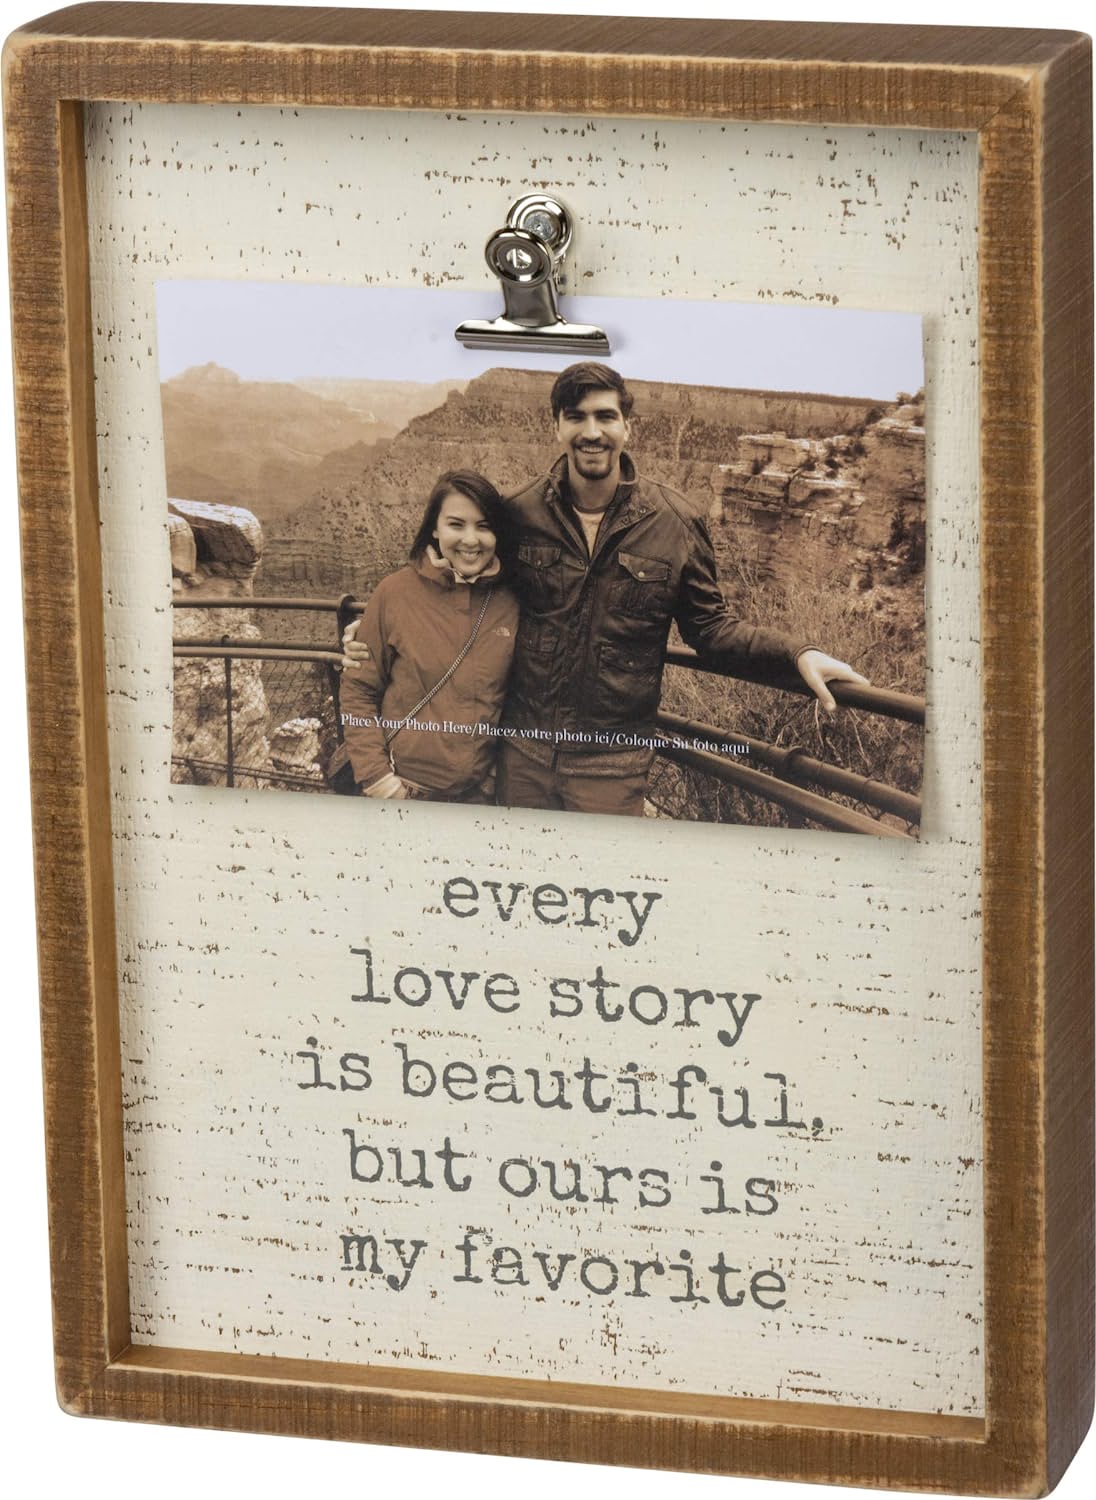 Primitives by Kathy Inset Photo Frame, 8″ x 11″, Every Love Story is Beautiful